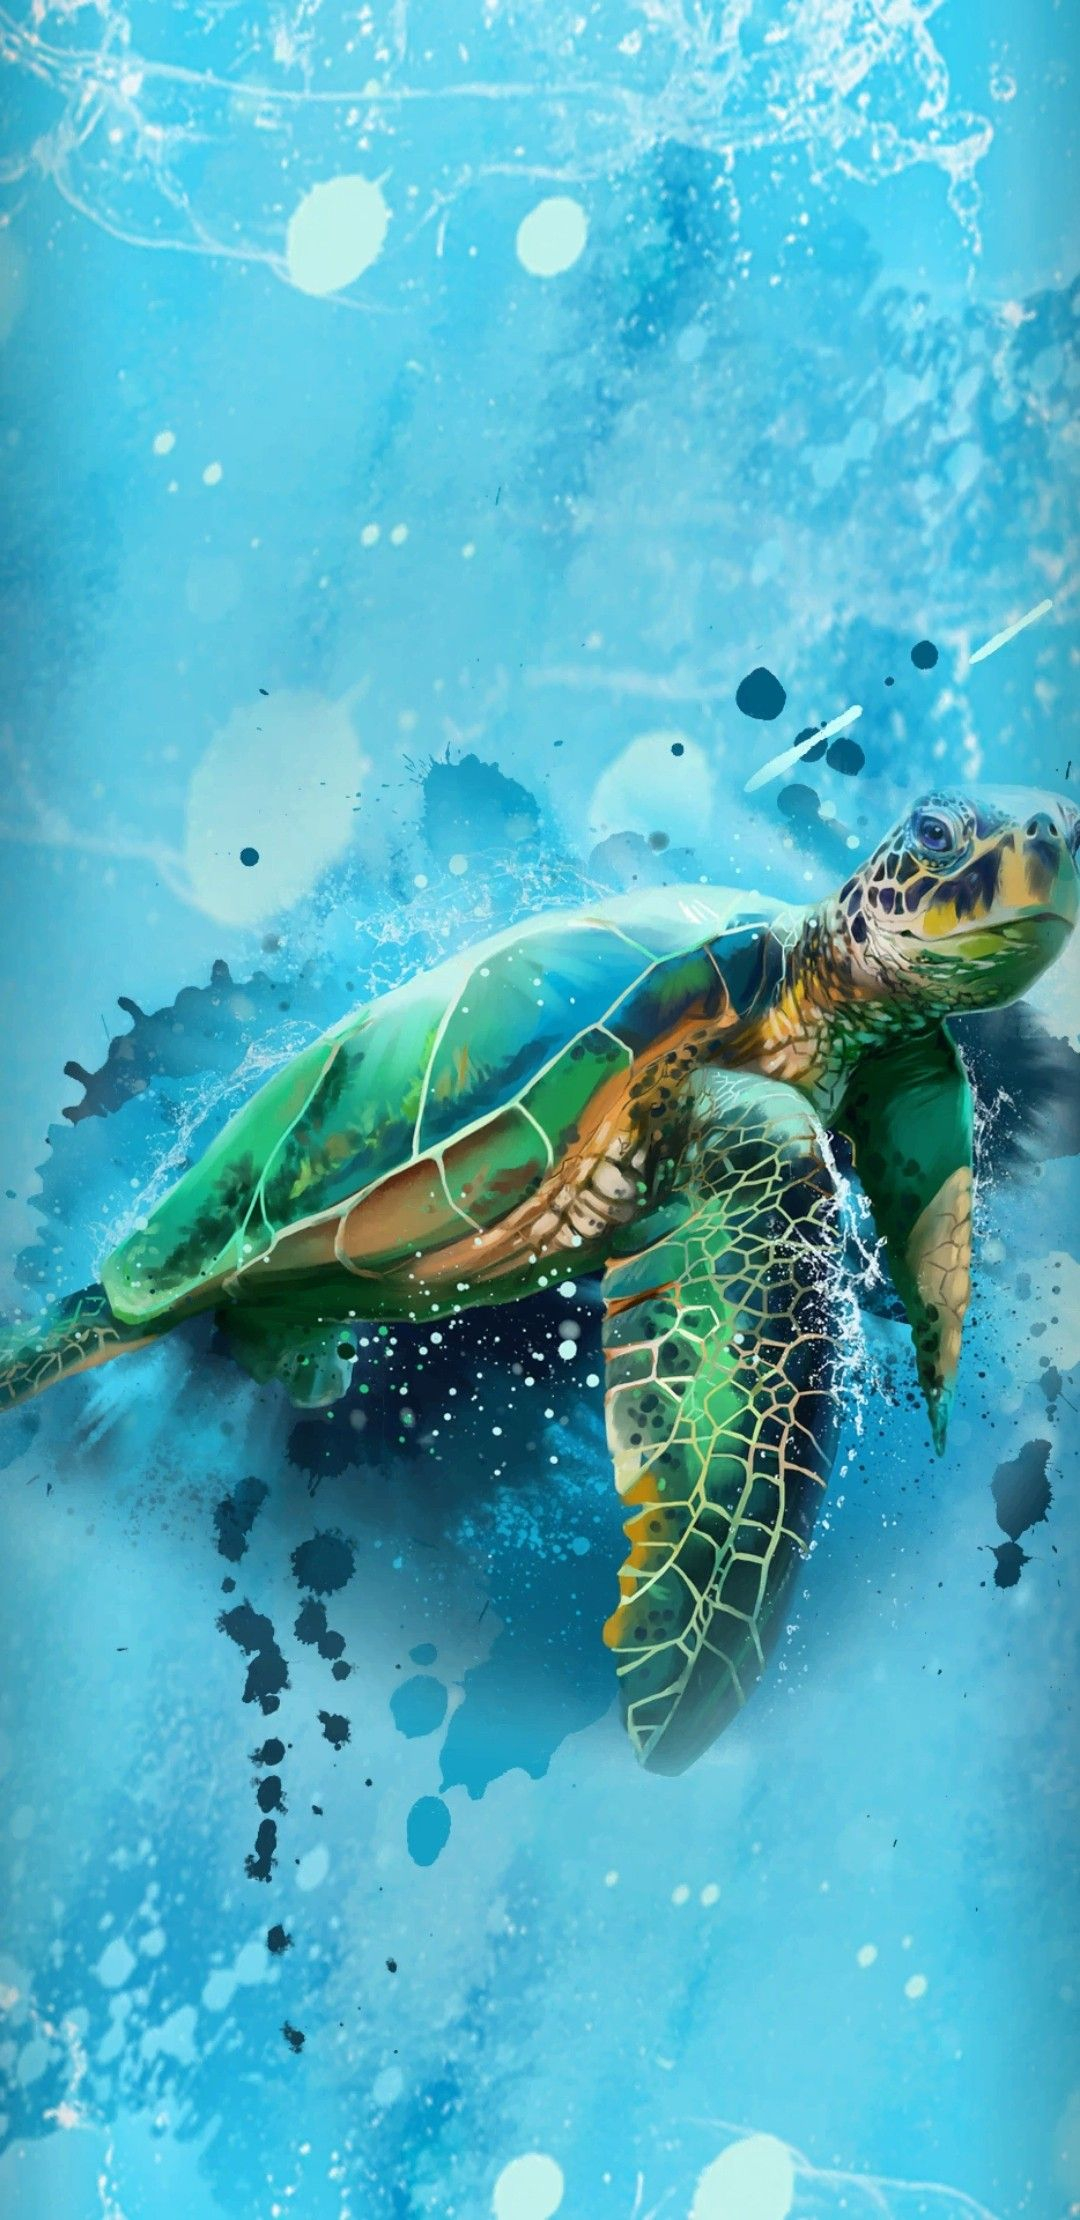 1080x2220 Pin by NicoleMaree77 on Turtle Wallpaper | Turtle wallpaper, Sea turtle wall art, Sea turtle wallpaper